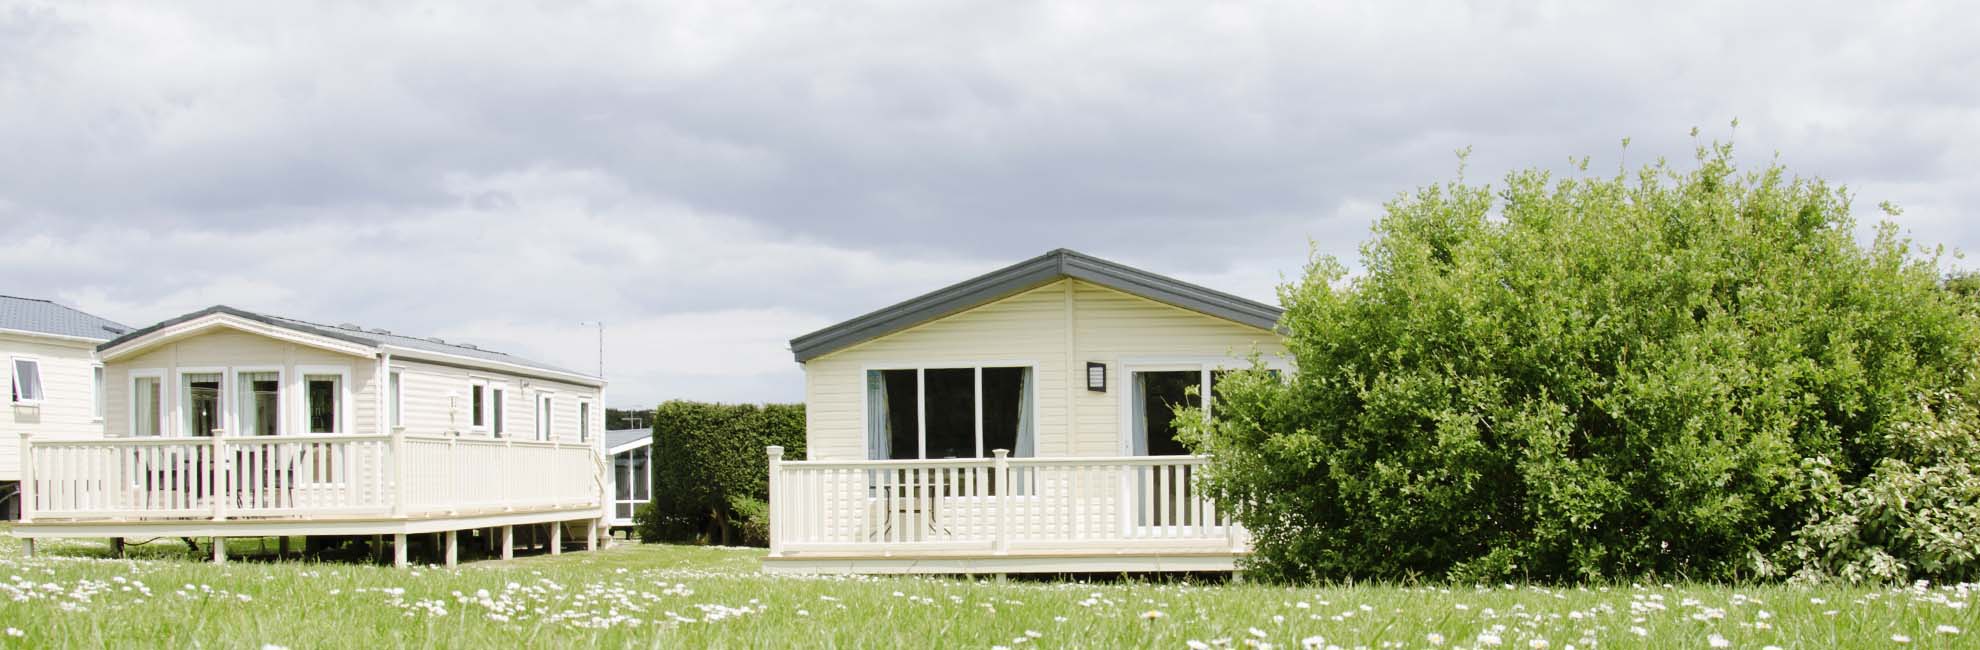 Lodges with verandas at a holiday park in Yorkshire